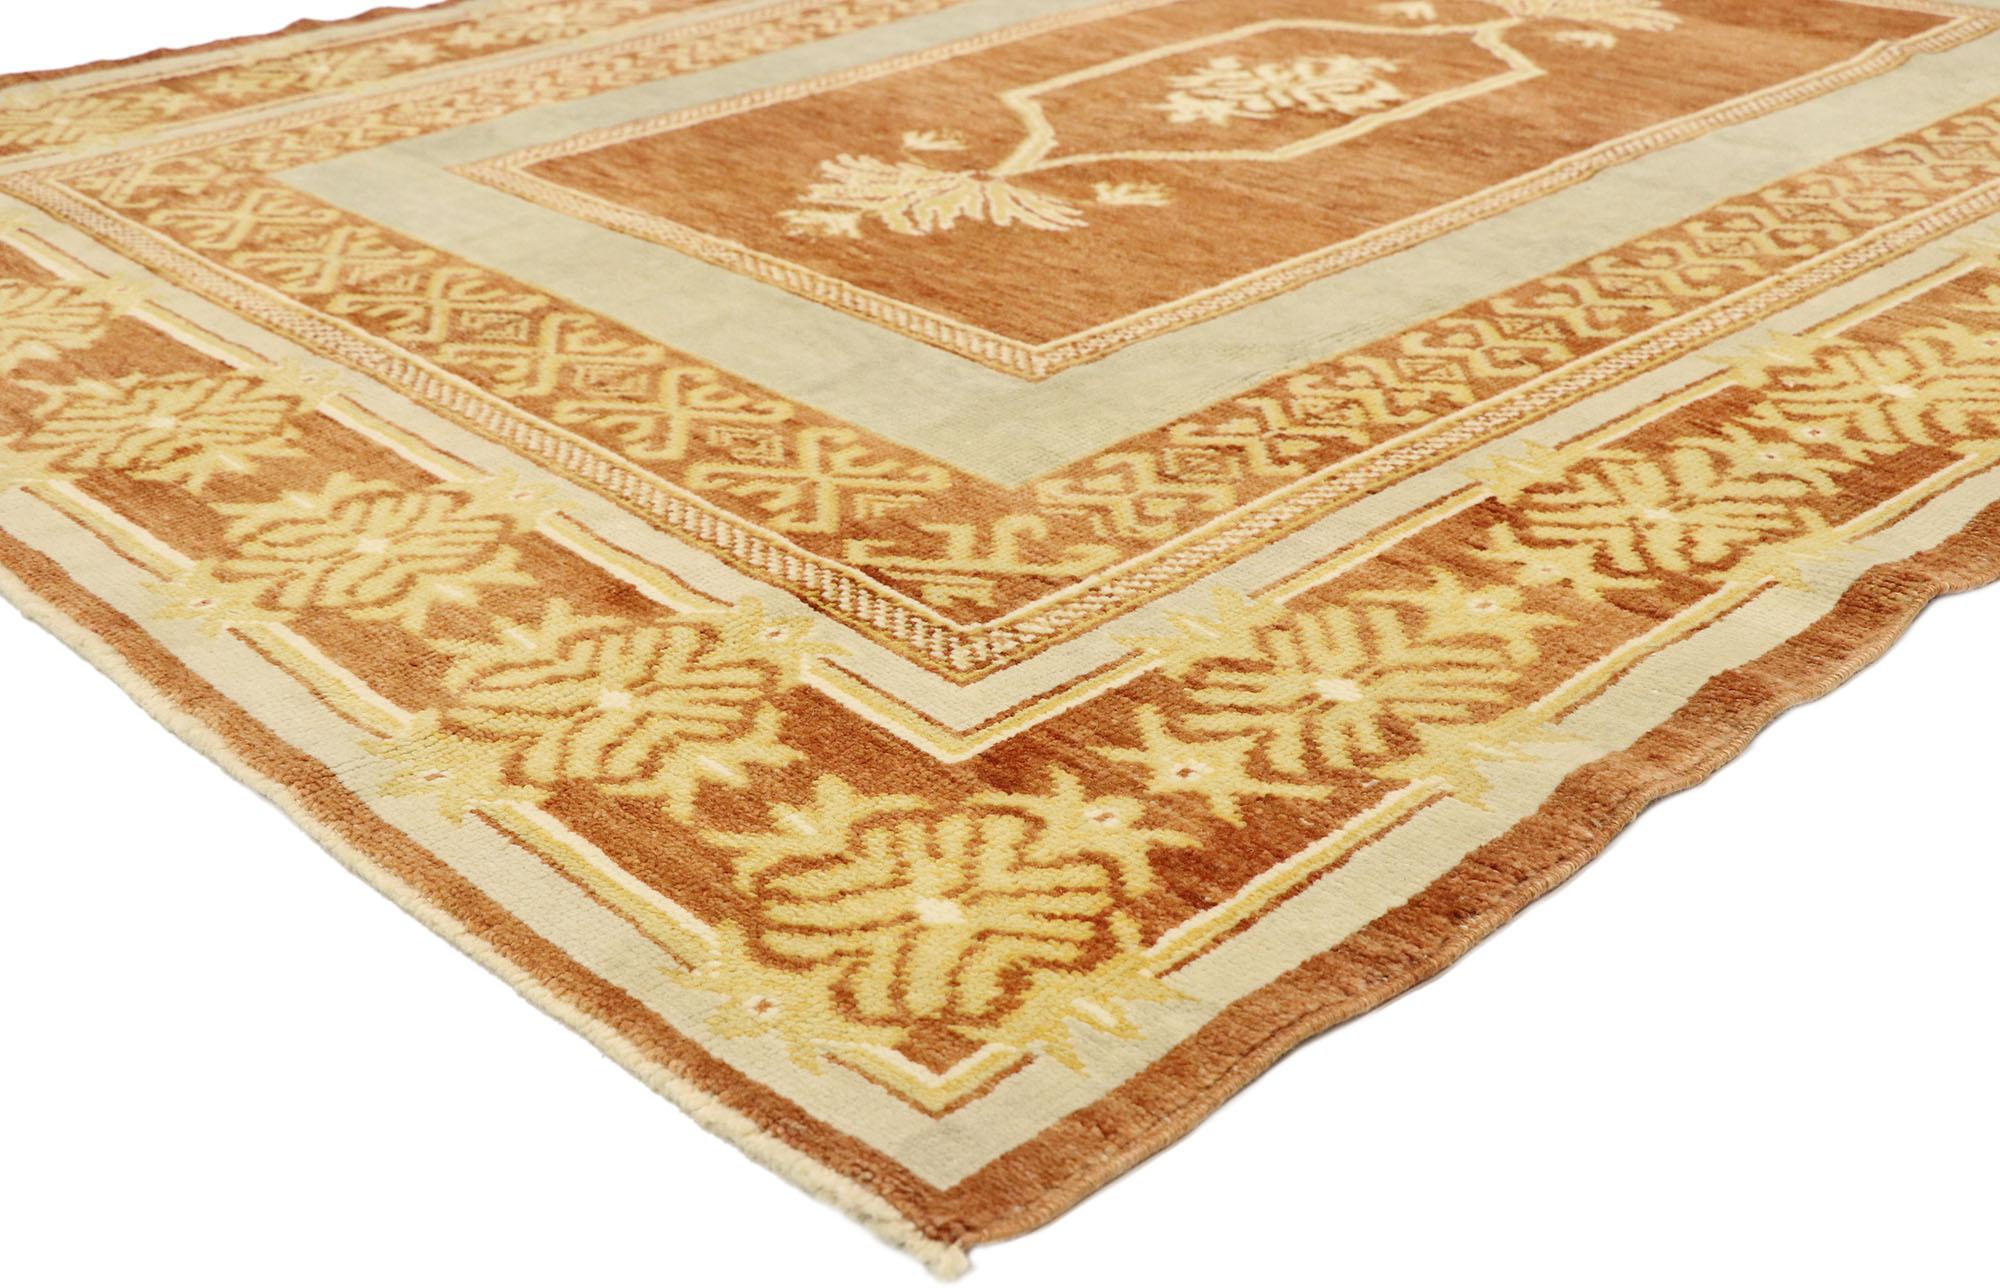 52932, new contemporary Turkish Oushak rug with modern rustic Mediterranean style 05'10 x 07'10. Reflecting facets of an Italian sun-drenched mountain terrain and warm earth-tone colors, this hand knotted wool contemporary Turkish Oushak rug